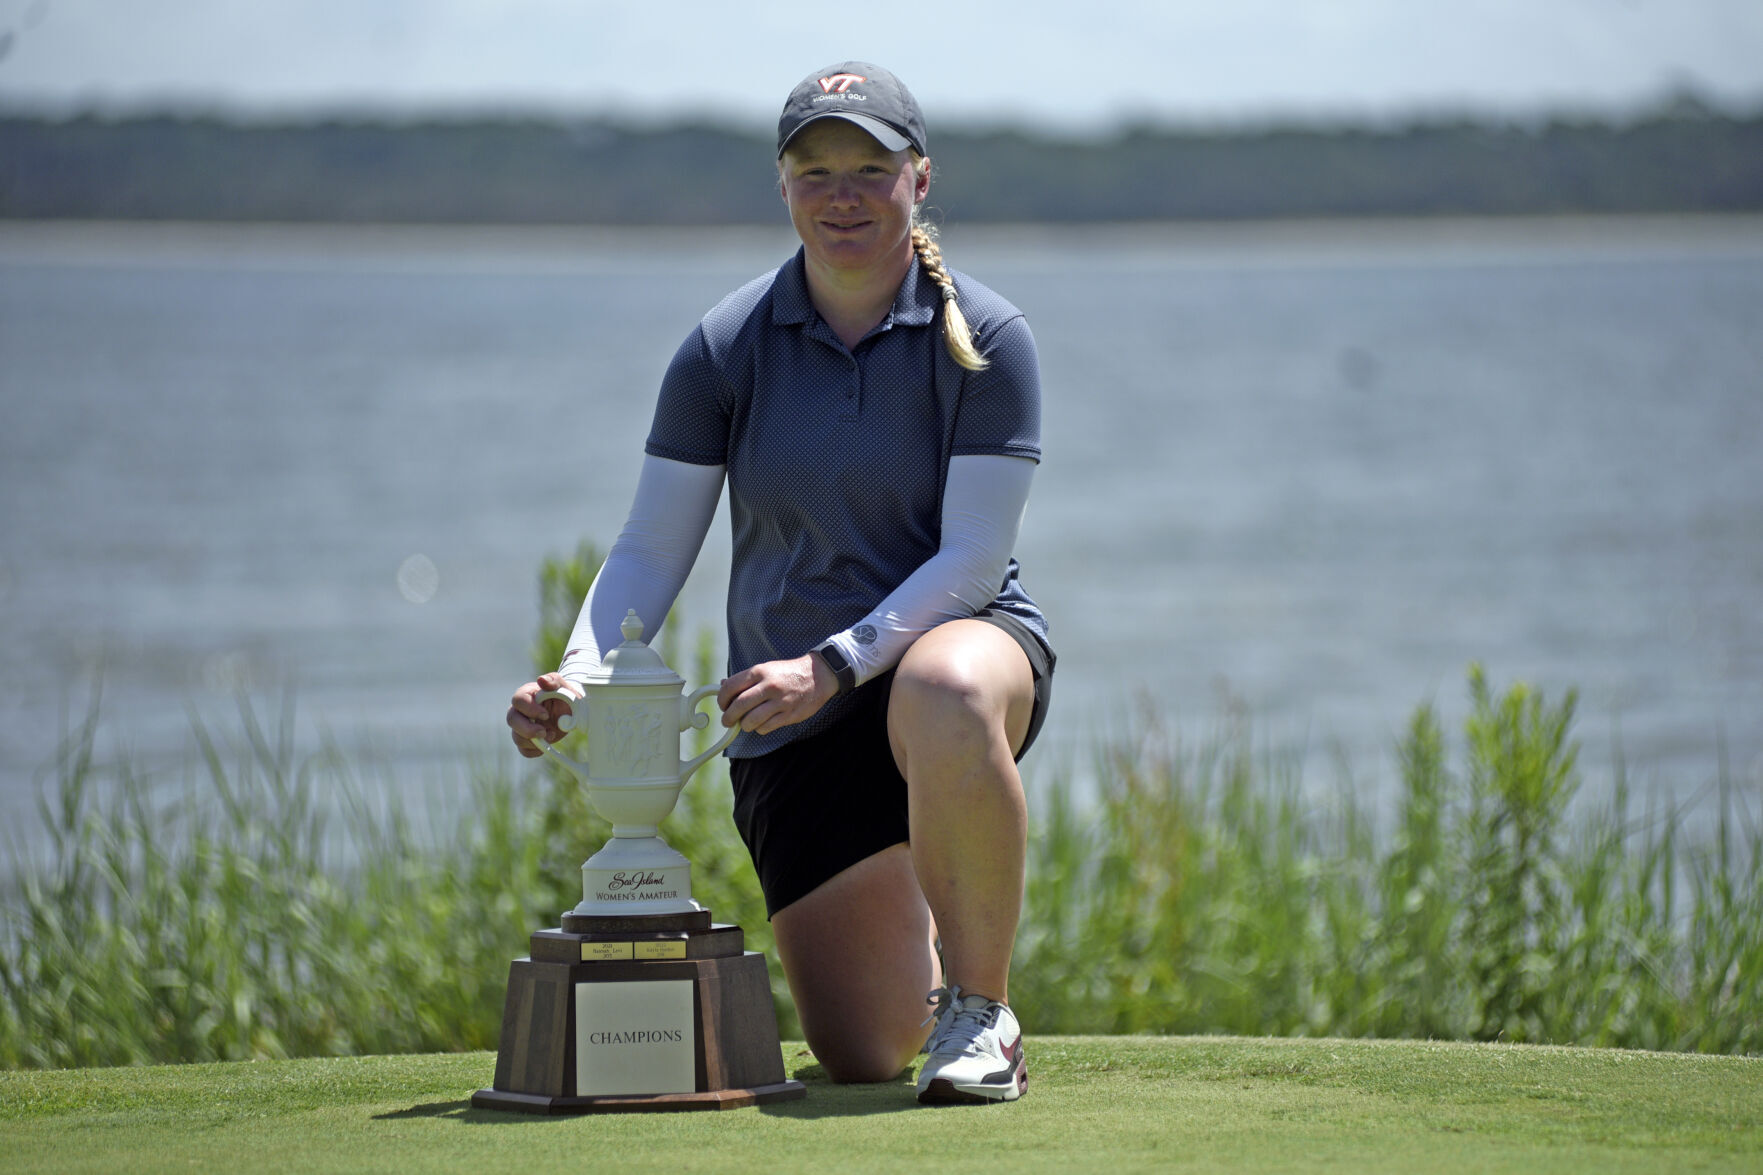 DOWN BUT NOT OUT Virginia Techs Morgan Ketchum comes from eight shots back to win Sea Island Womens Amateur Local Sports thebrunswicknews